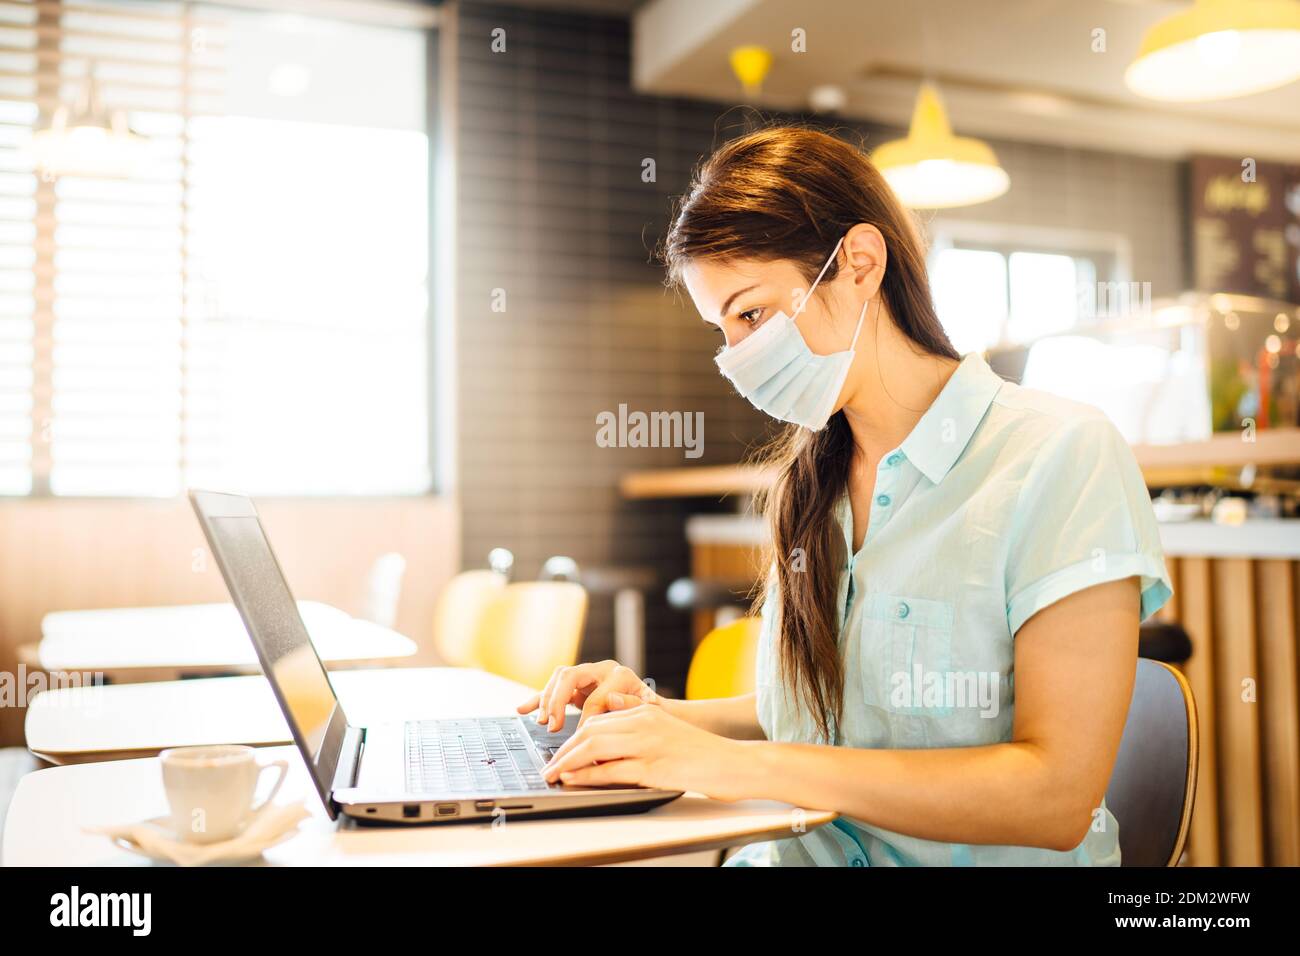 Young woman working on laptop, wearing protective face mask.Online training education and freelance work.Studying remotely.Outsourcing. Coronavirus pa Stock Photo